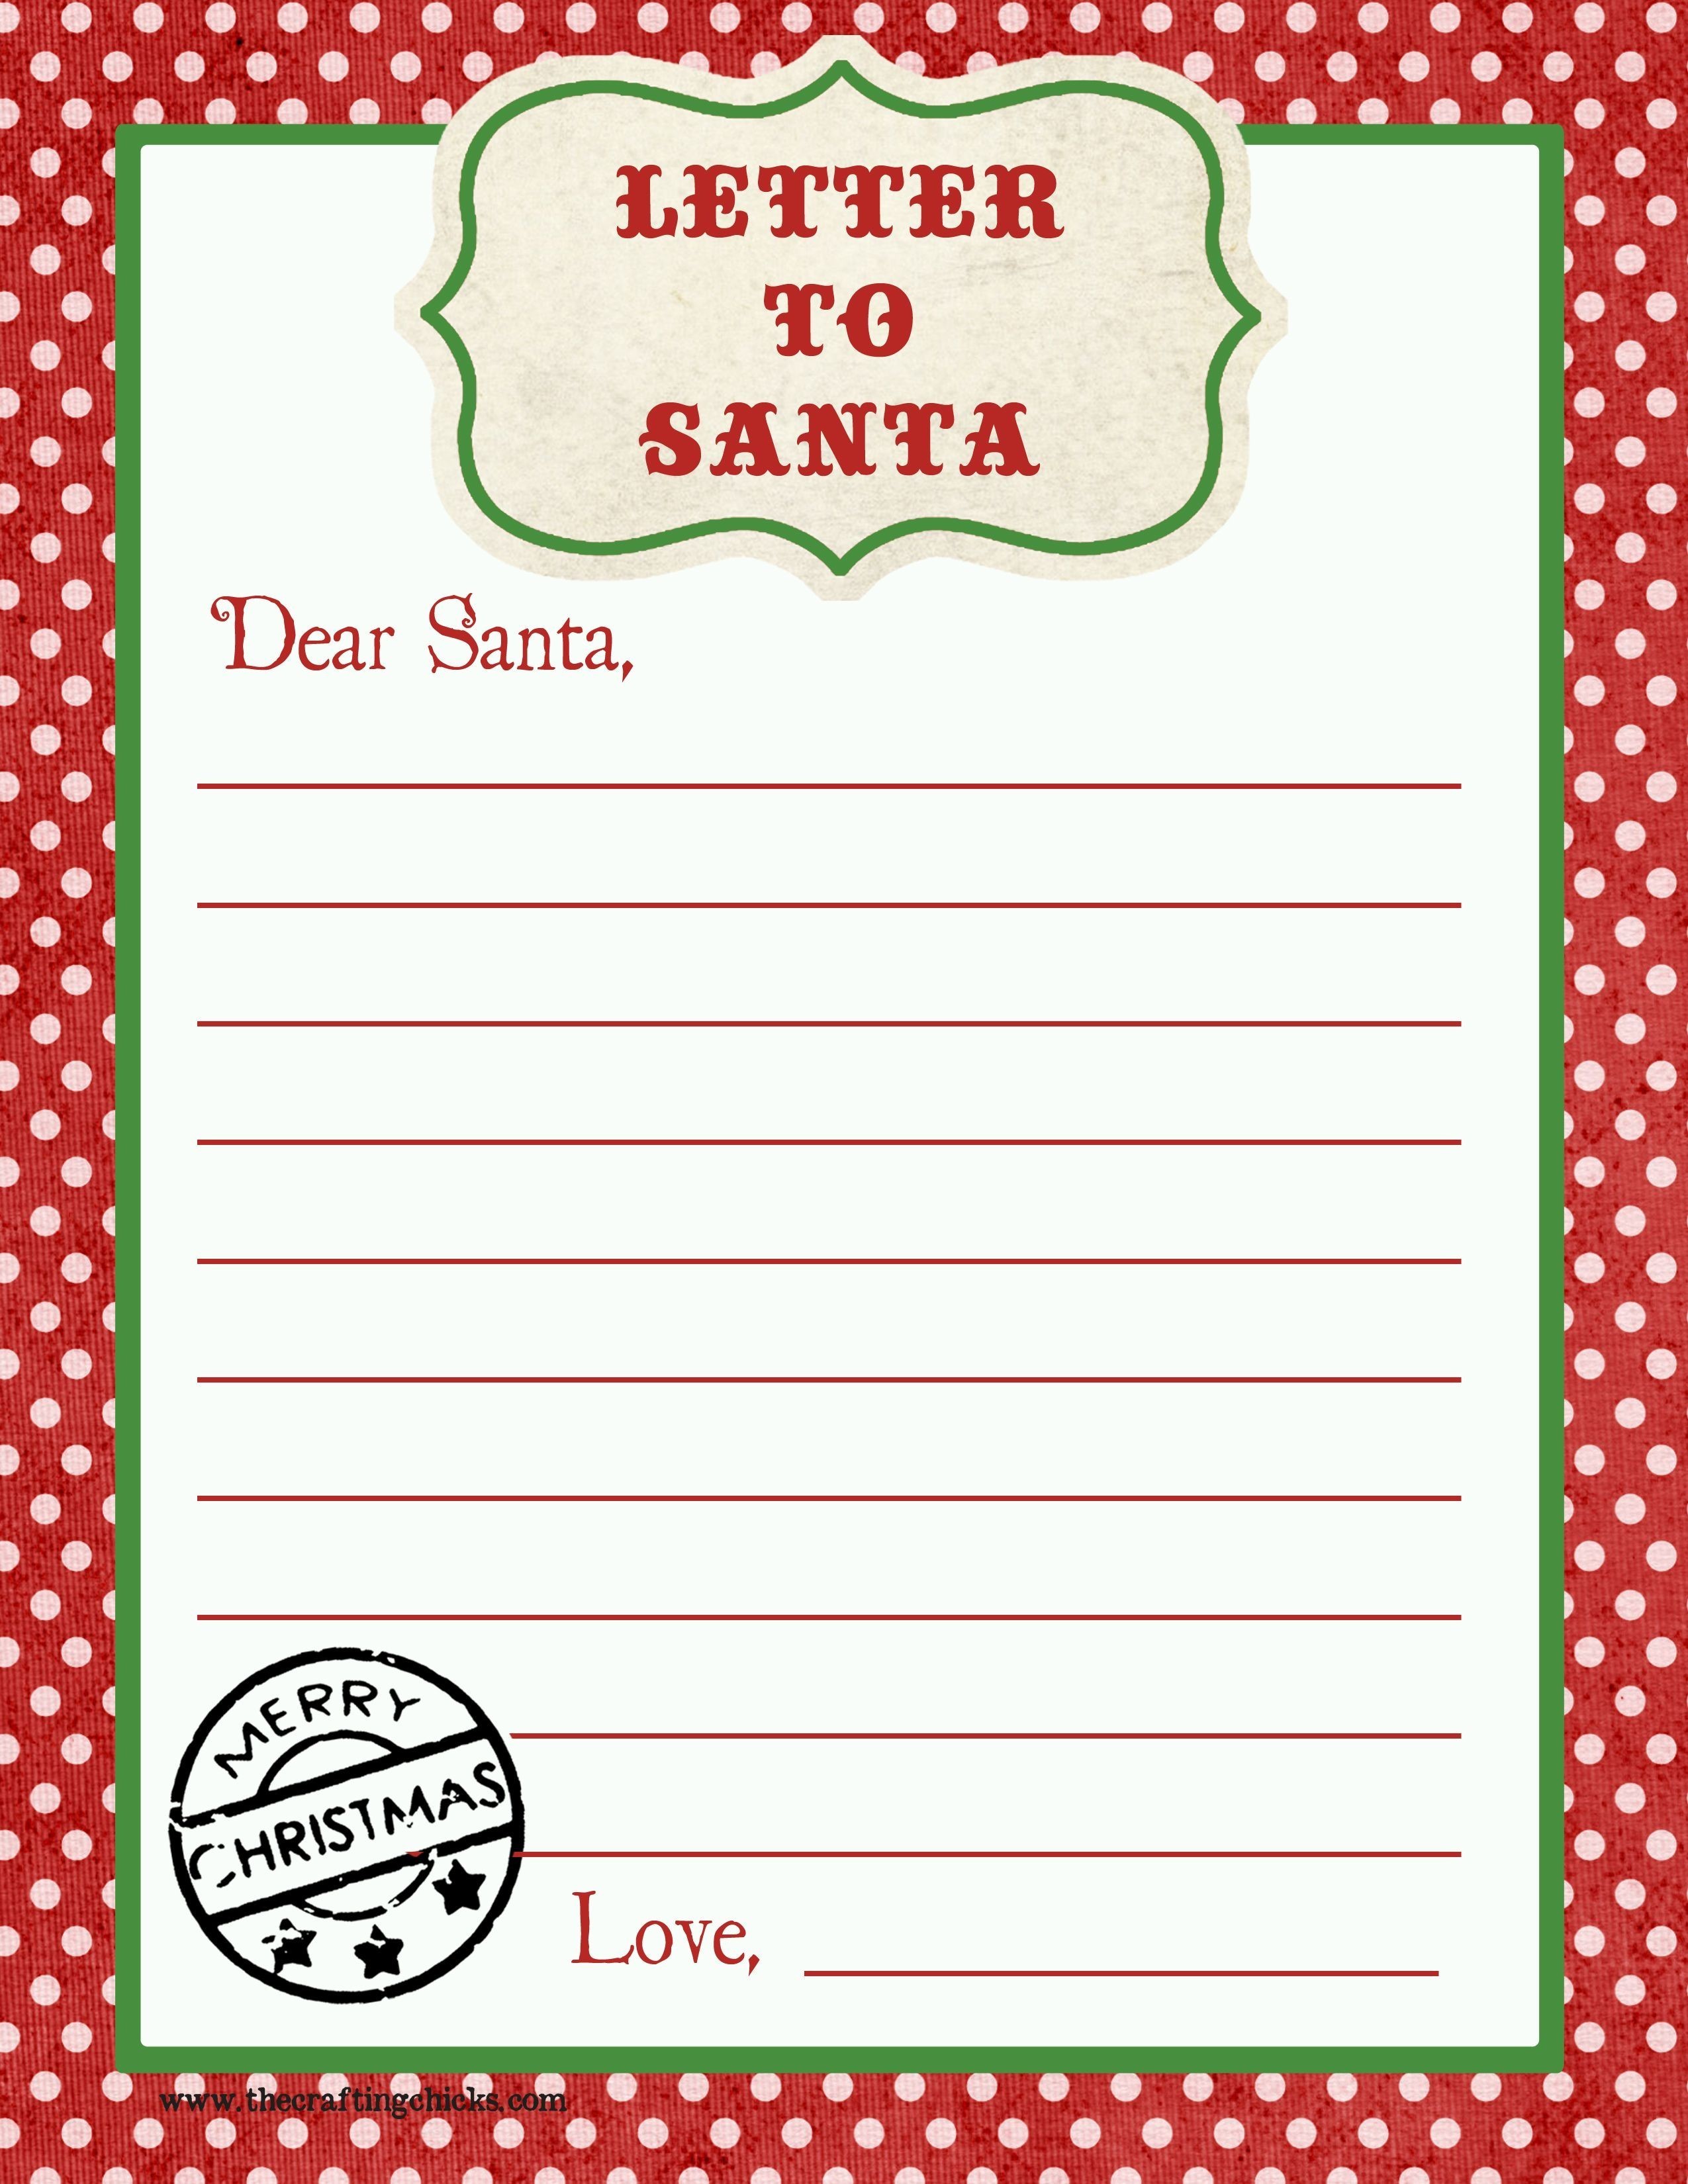 Free Christmas Letter Templates From Santa New Editable Template